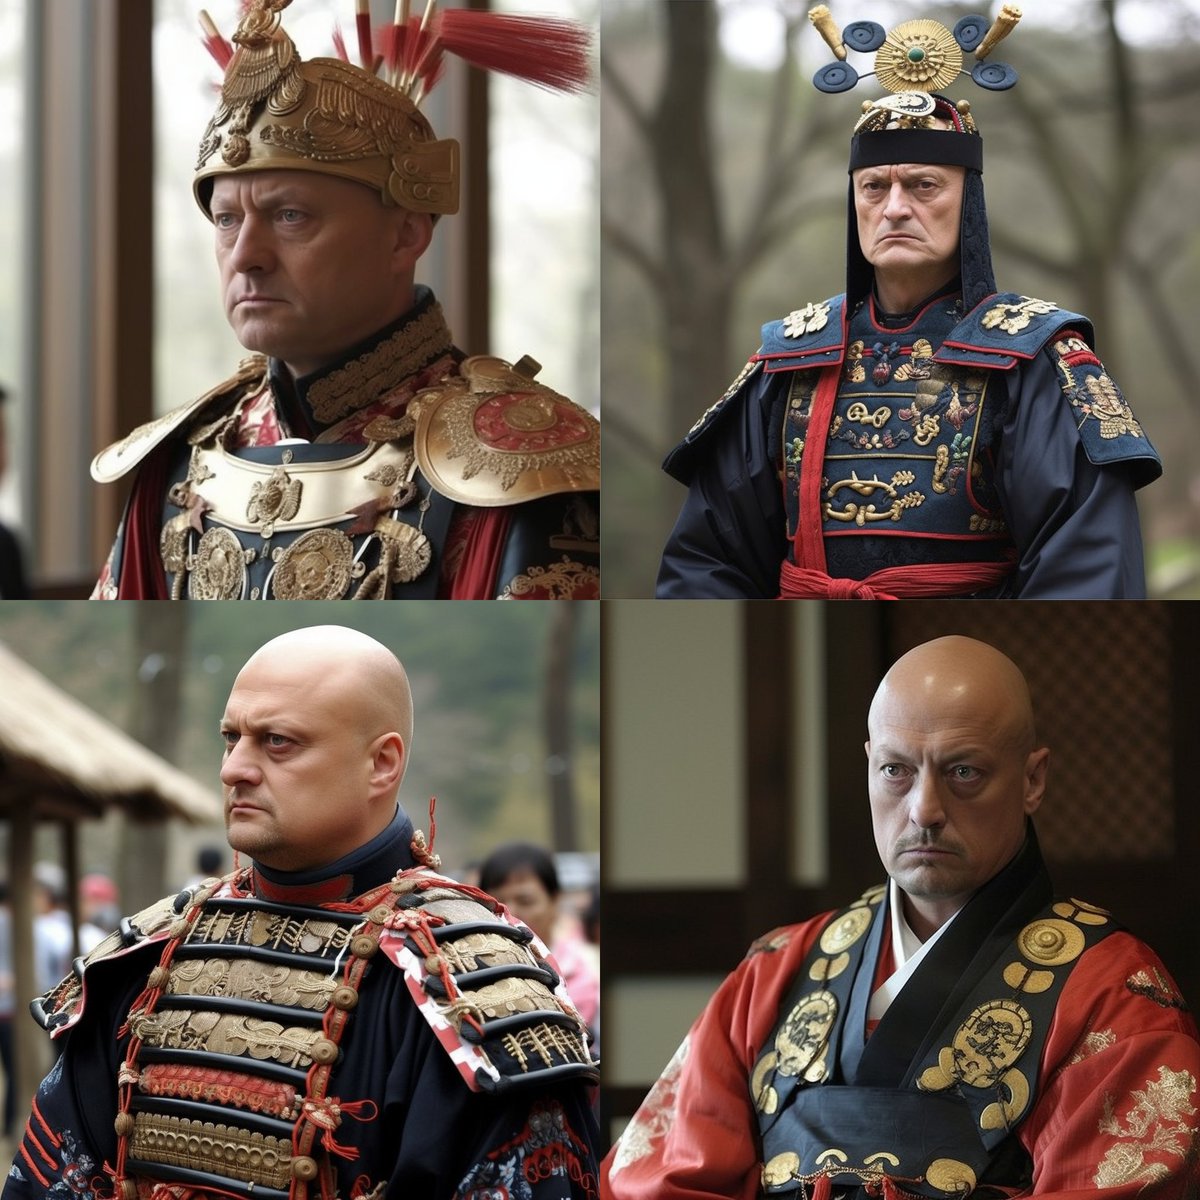 Talk already that if Wagner and Prigozhin succeed in their coup that they'll leave the civilian government in place and/or Restore The Romanovs?

Whilst obviously maintaining defacto military control centralized in Prigozhin.

Who had RUSSIAN SHOGUNATE on their HOI4 bingo card?